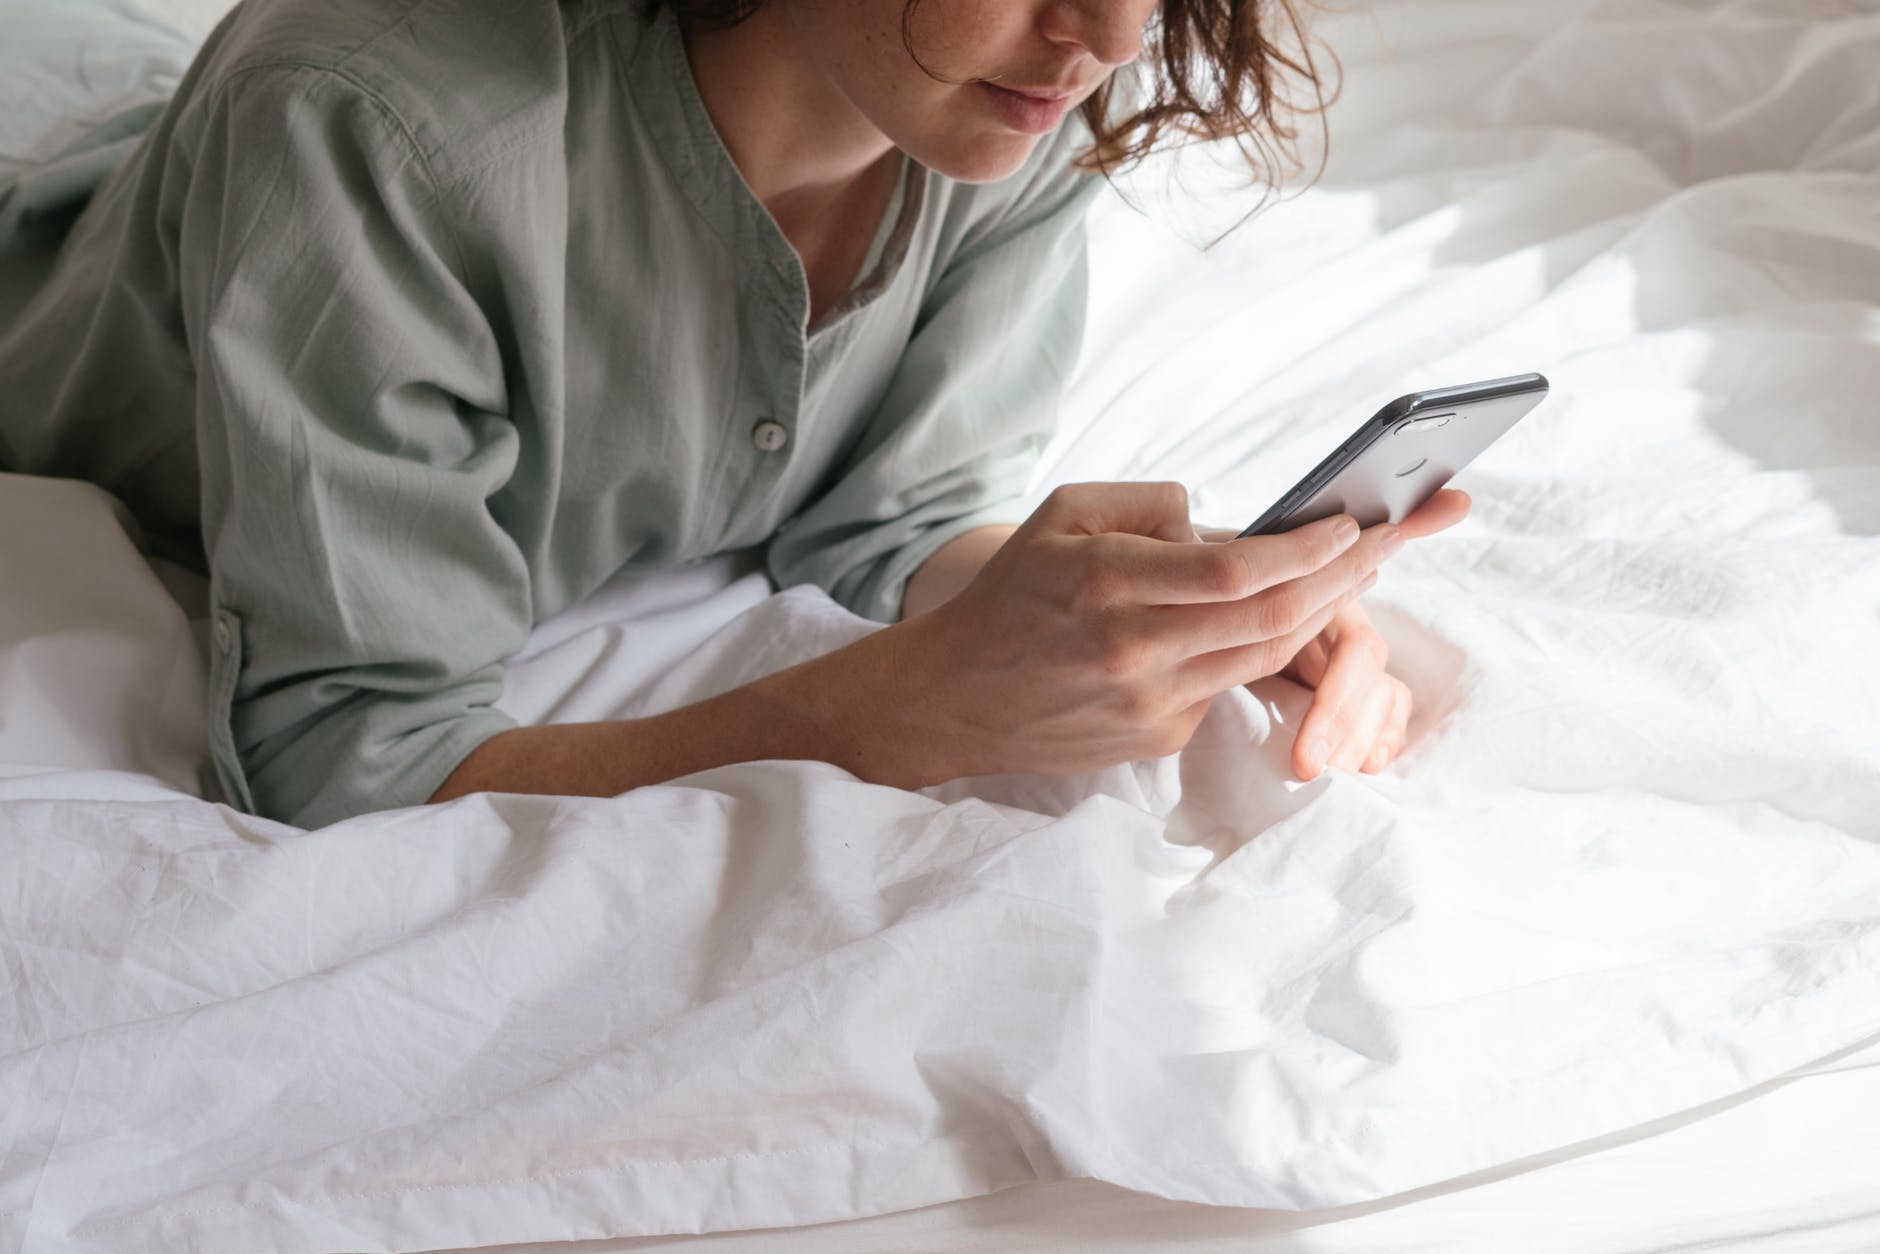 woman using smartphone in bed

how to achieve your wildest dreams through social media